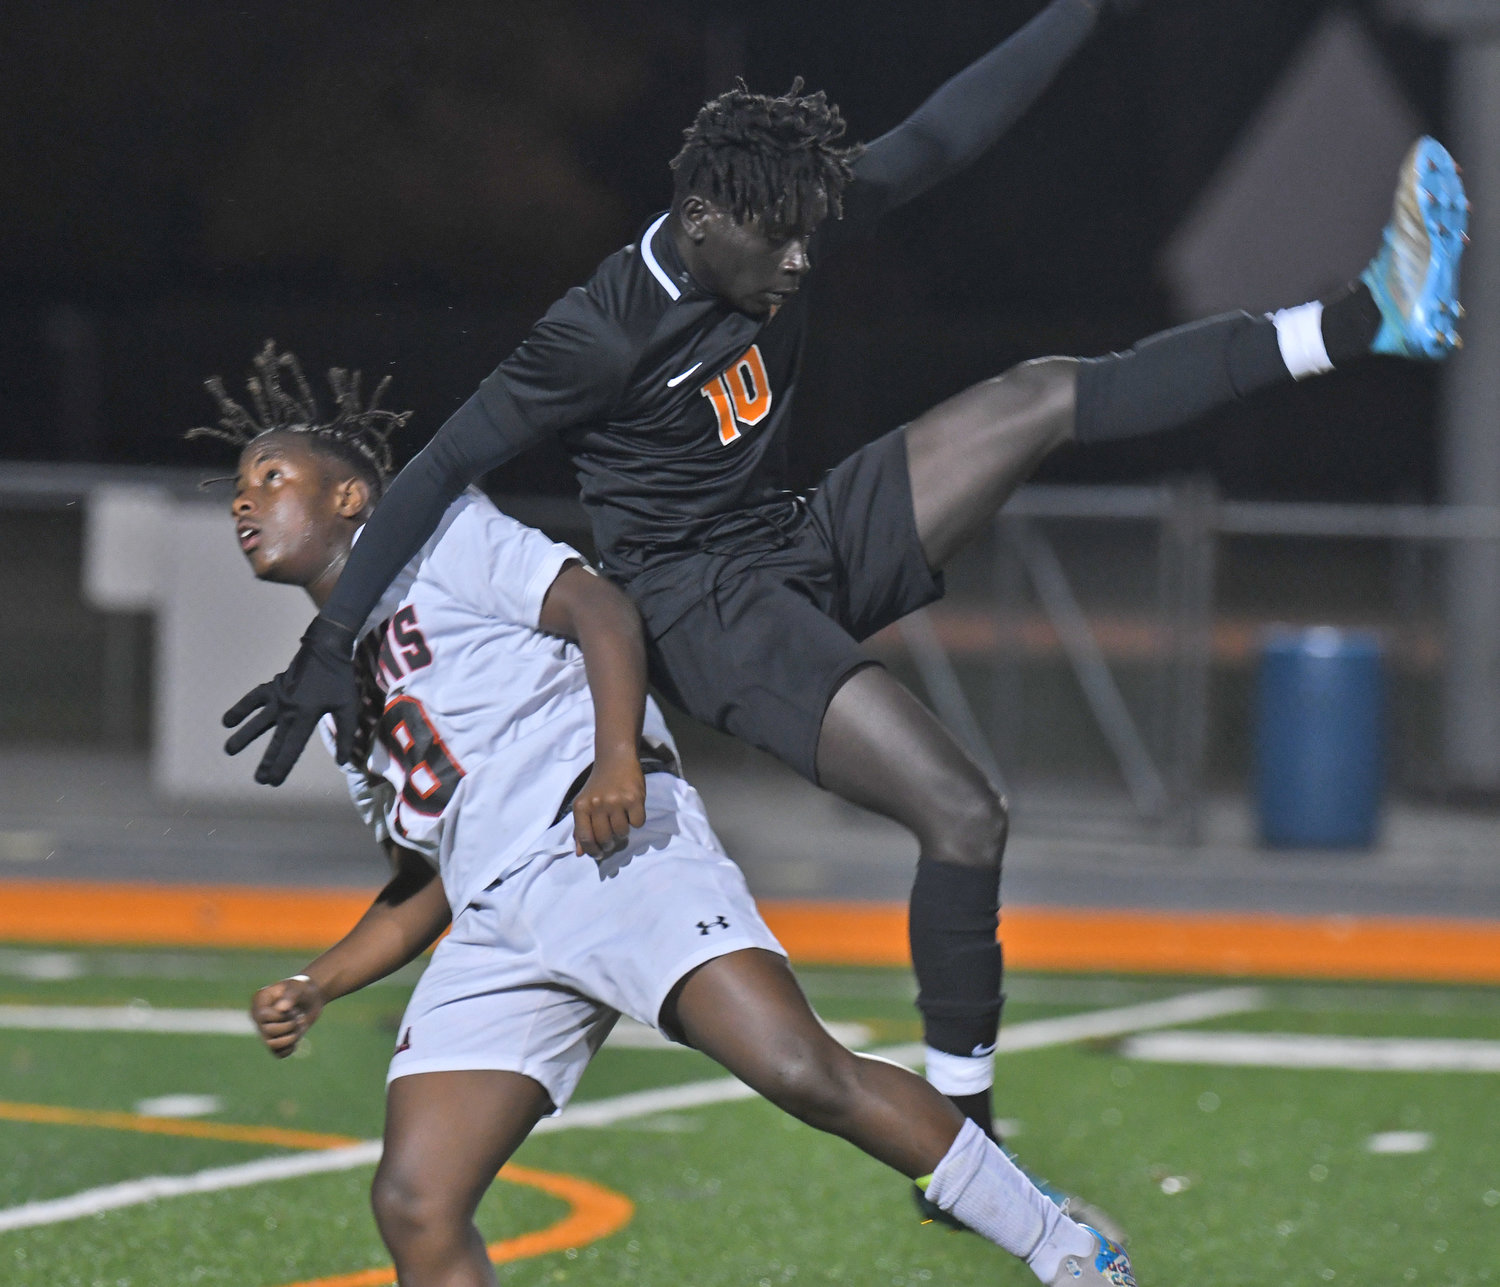 Rome Free Academy's Amanuel Mellace goes airborne in a battle for the ball against Fowler's Jackson Indihafiki in the first half Wednesday night at RFA Stadium. RFA got a late goal to earn a 1-0 win in the Section III Class AA opening round playoff win.